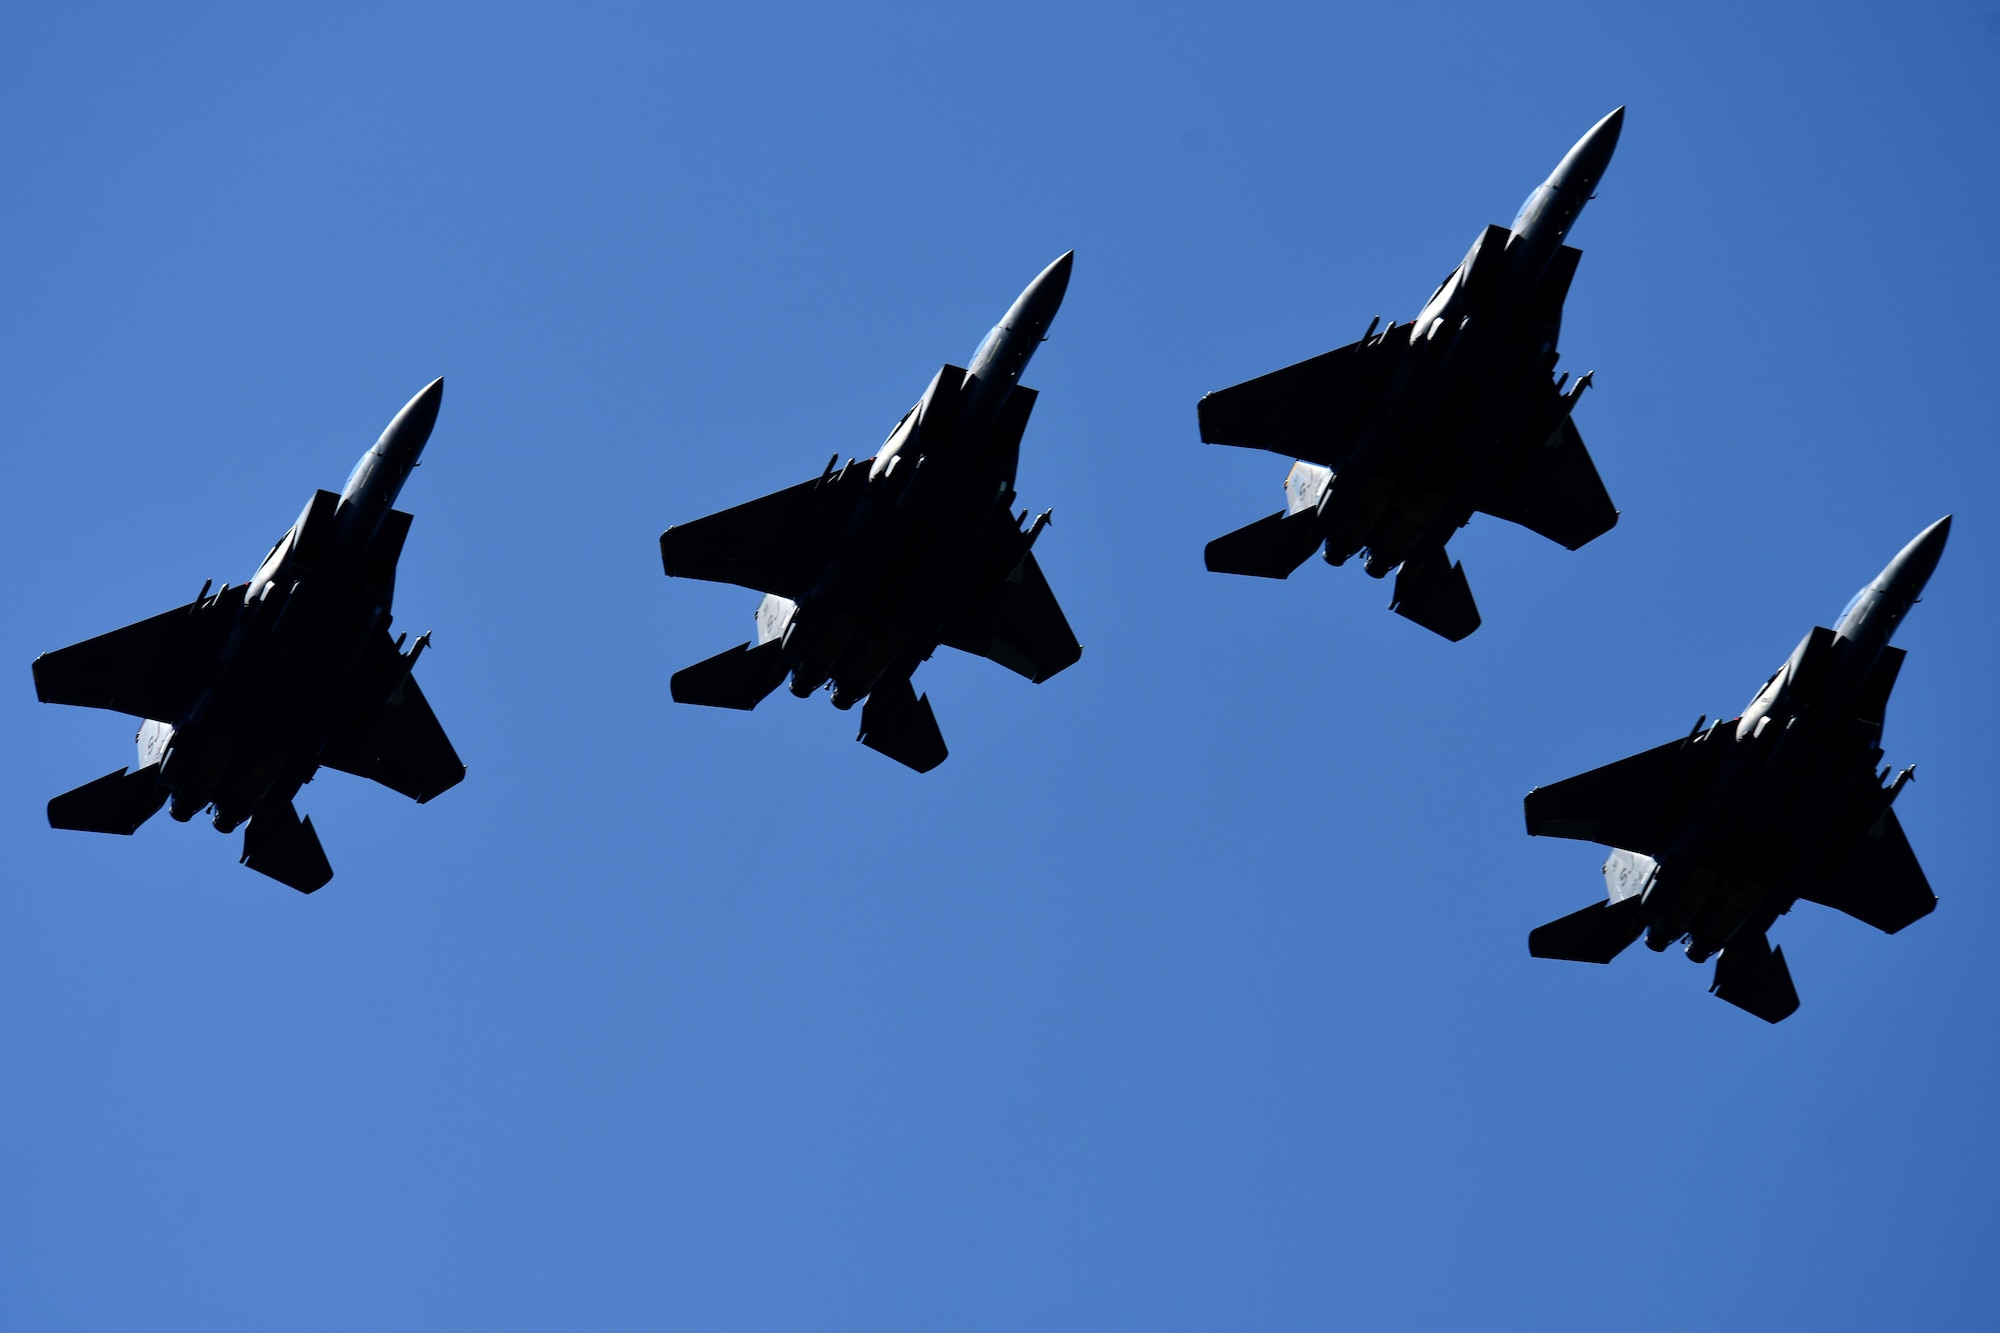 An F-15E Strike Eagle four-ship formation flies over the crowd during the Wings Over Wayne Air Show, May 20, 2017, at Seymour Johnson Air Force Base, N.C. Later this year, the 4th Fighter Wing will celebrate its 75th anniversary with a week of heritage events and ceremonies. (U.S. Air Force photo/Airman 1st Class Miranda A. Loera)